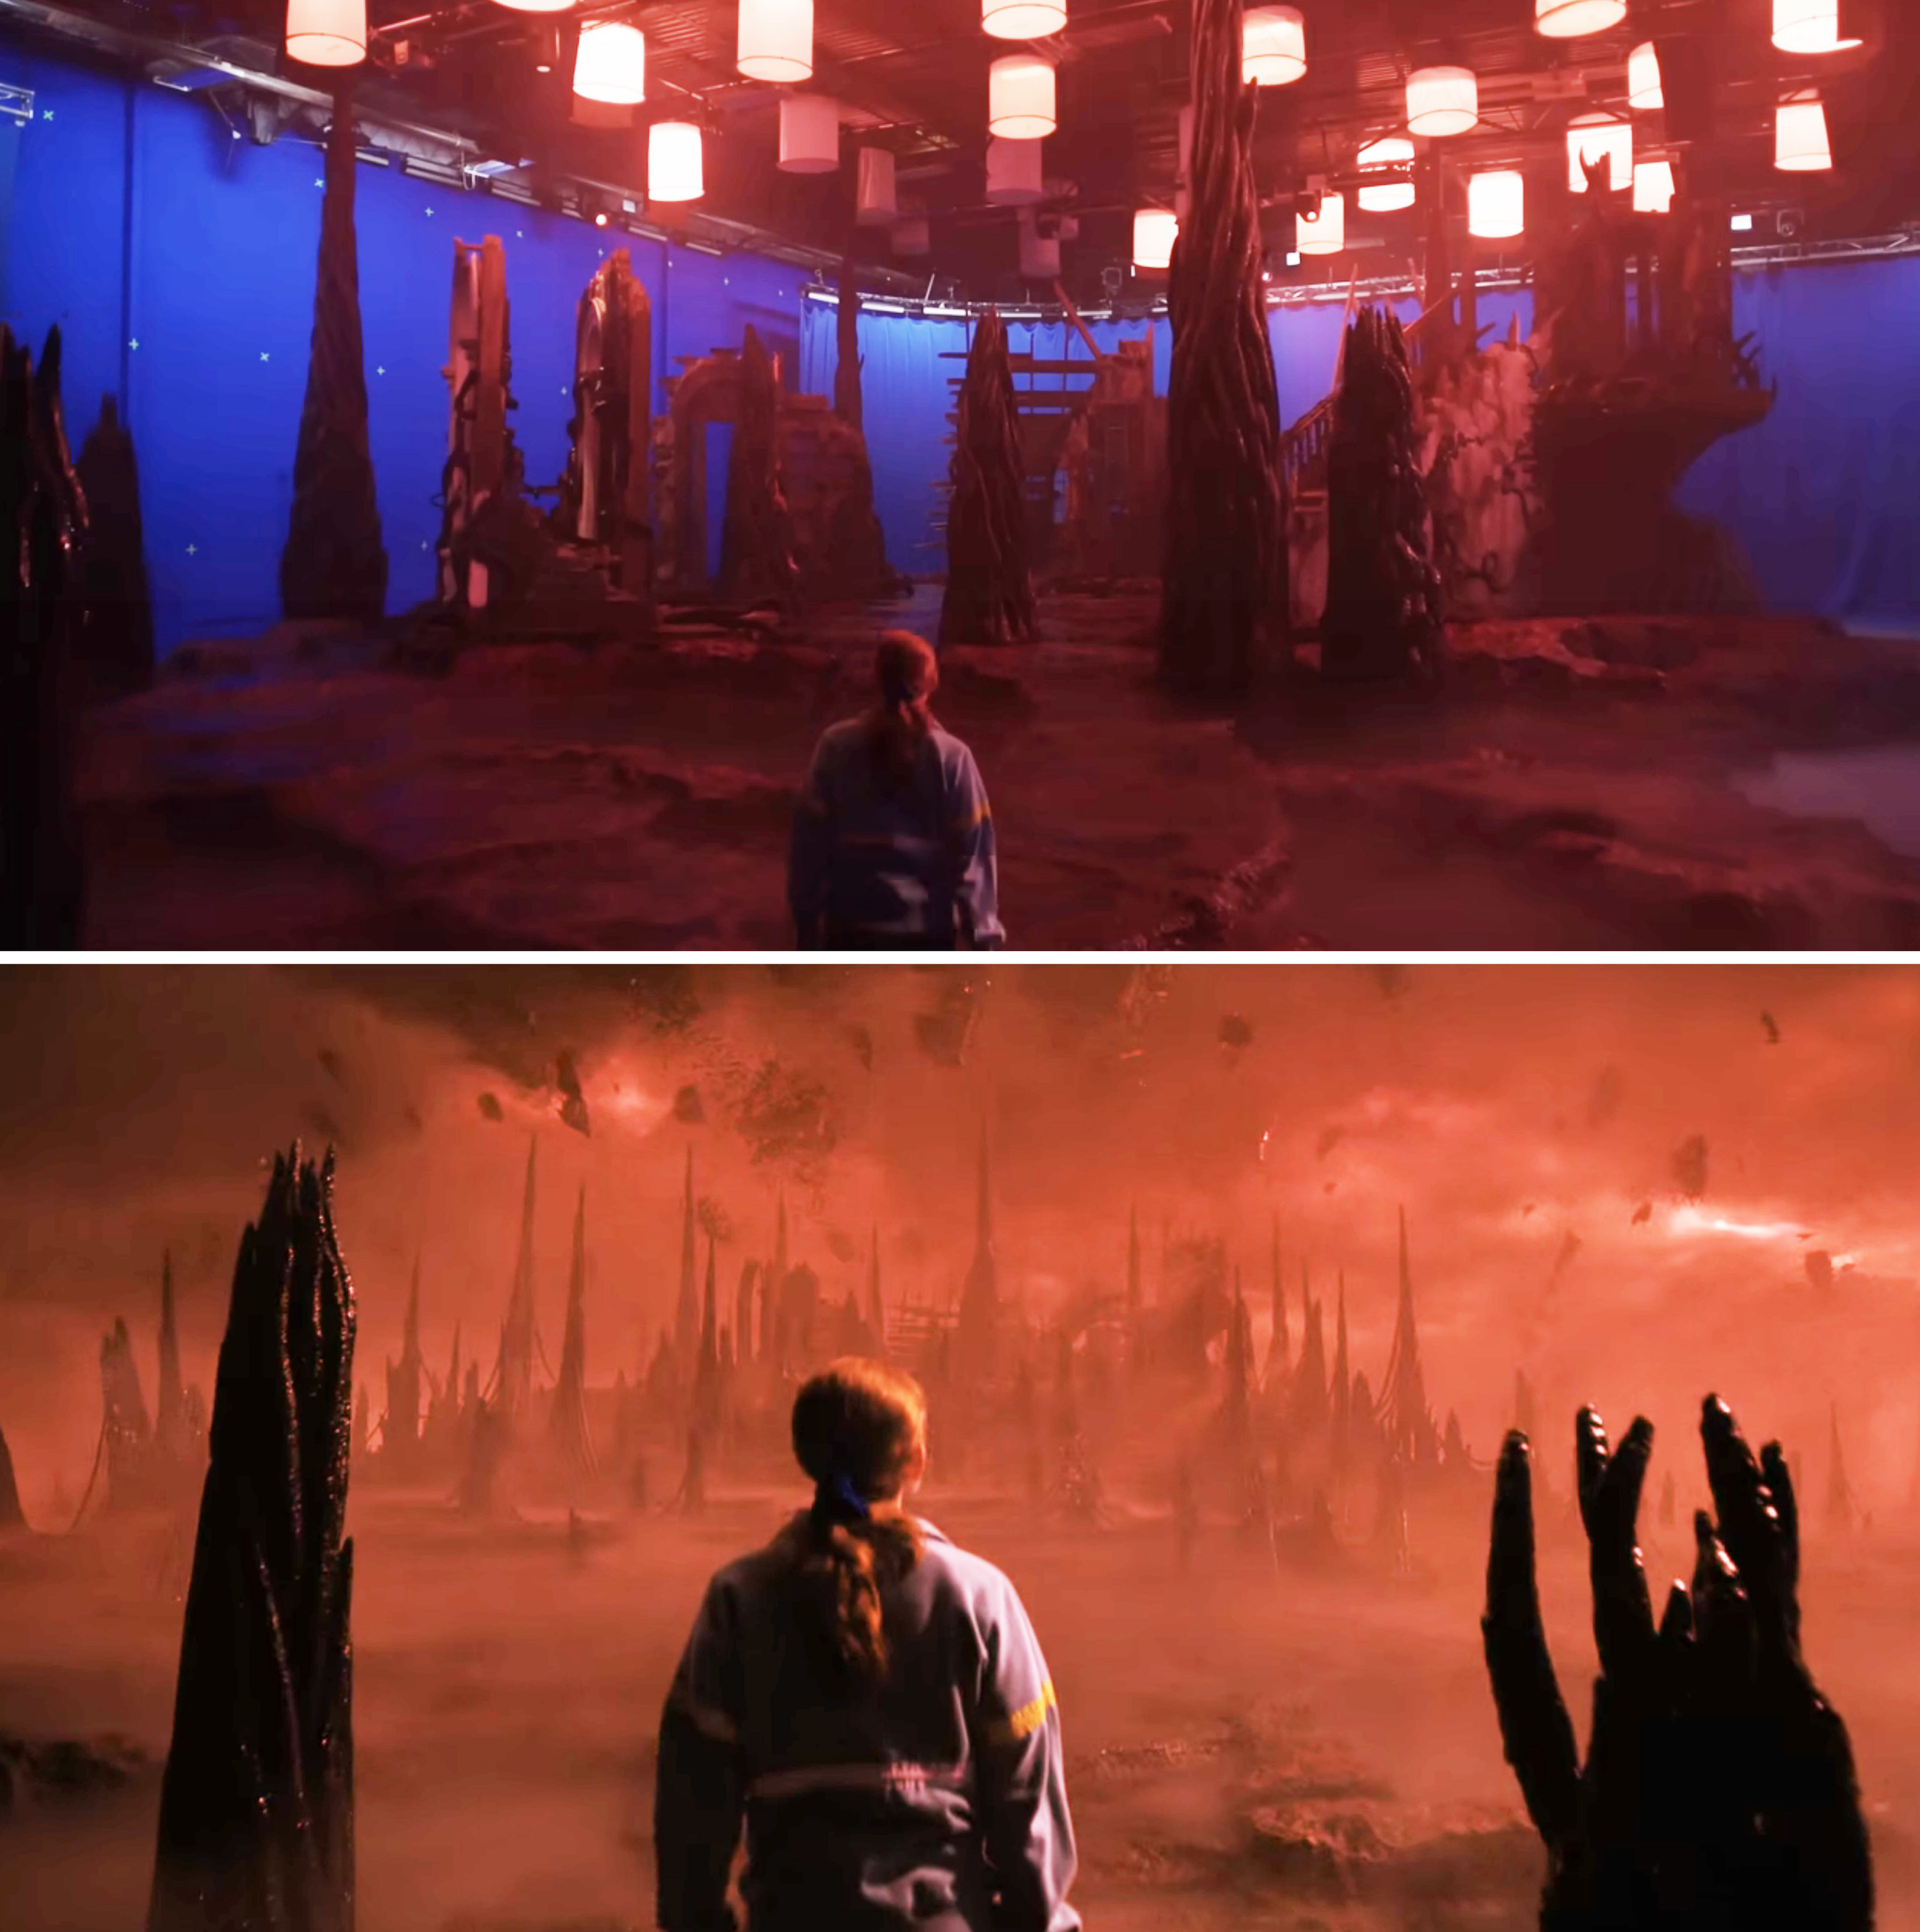 The Creel house in the Upside Down set vs in the show